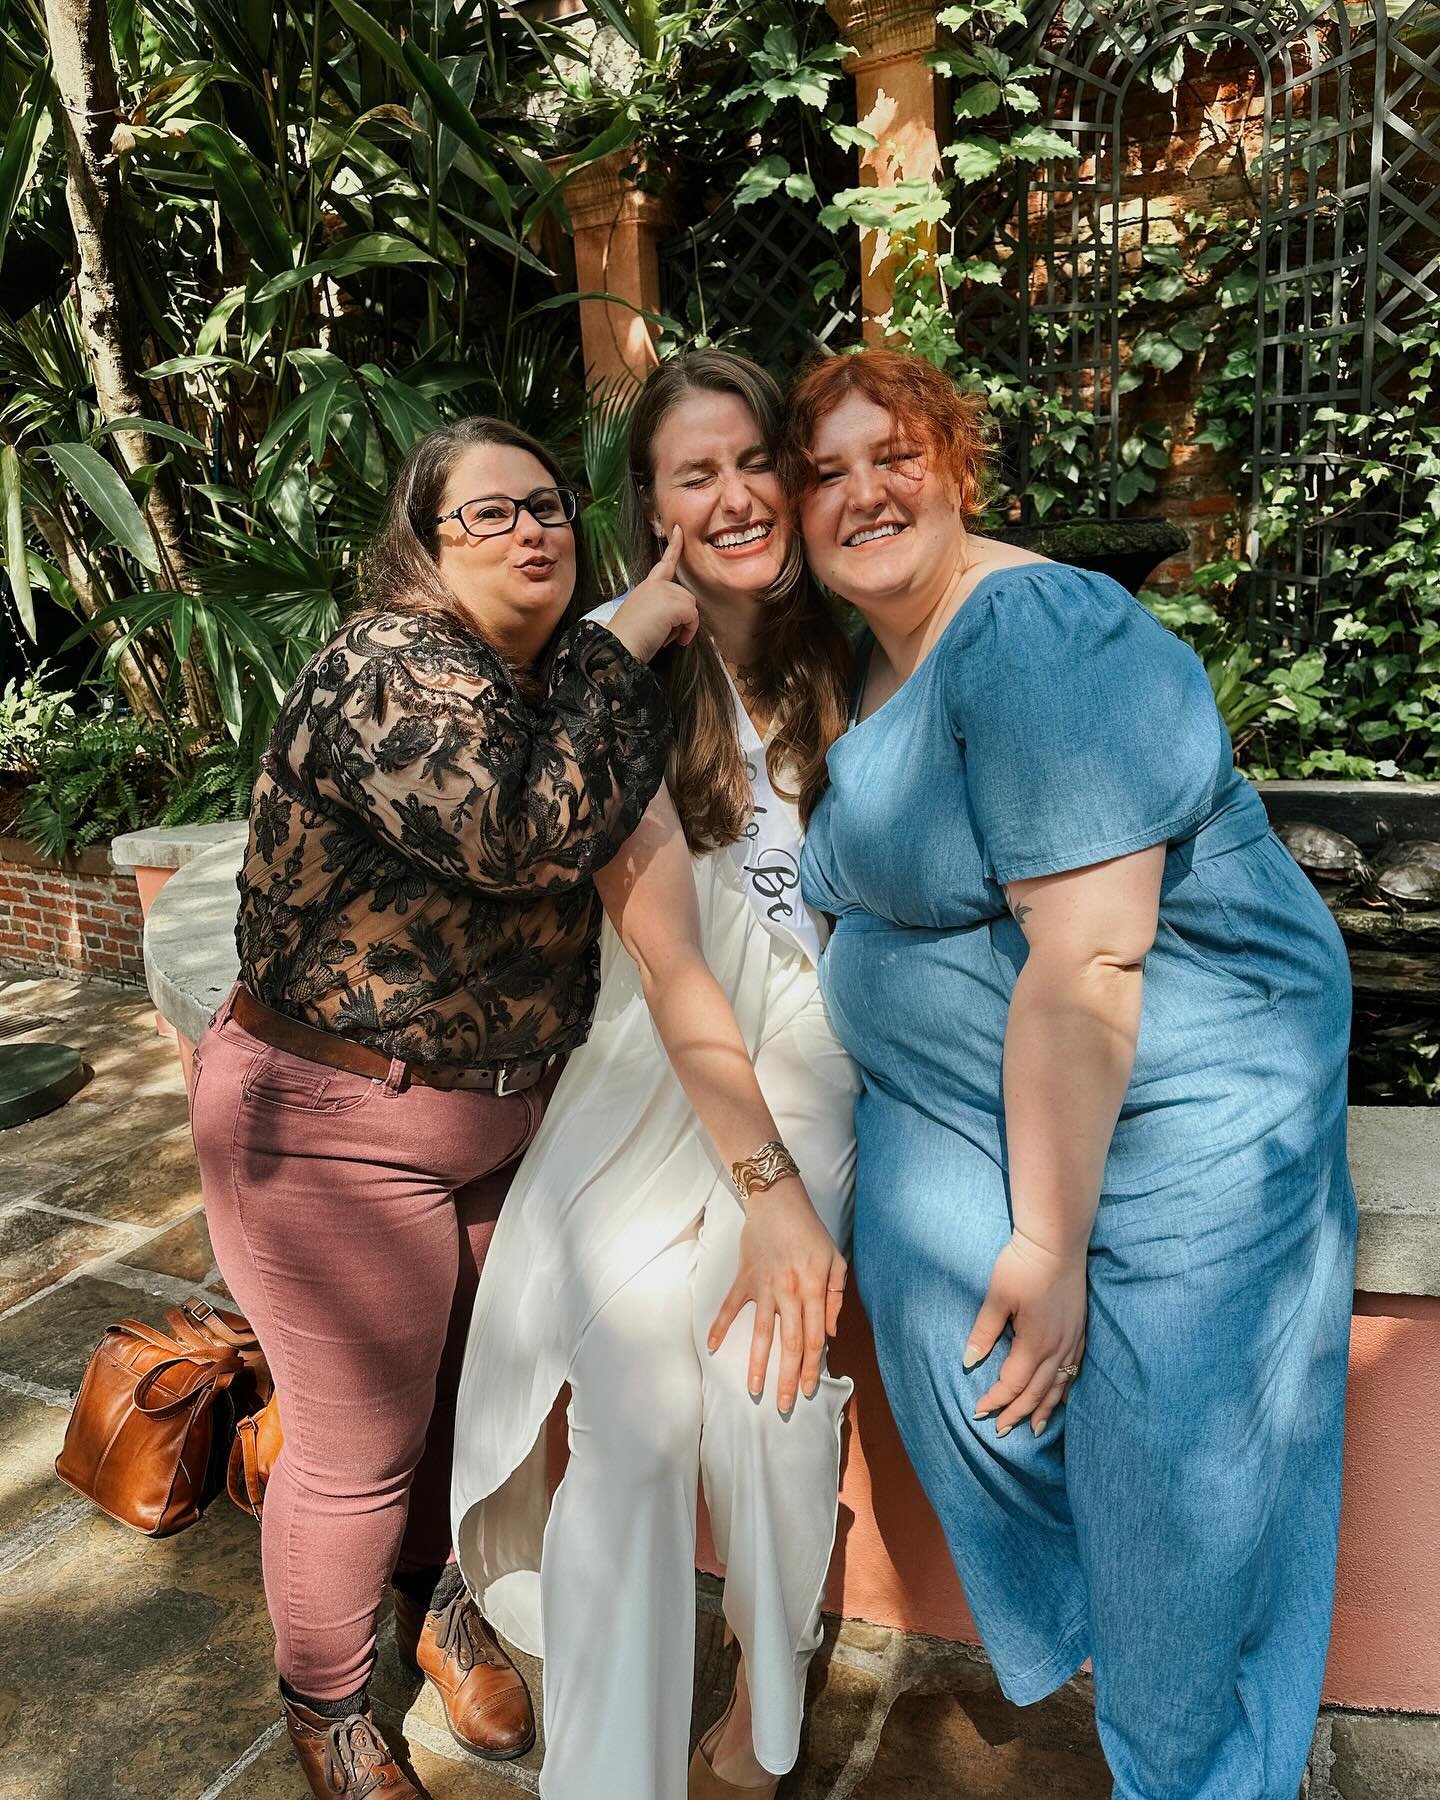 When it&rsquo;s been years, but you&rsquo;re sitting on the floor eating charcuterie and howling with laughter like the last time you saw each other was yesterday.

Thank you @allisonchesley and @arttytea for getting together for a &ldquo;Very Tiny a